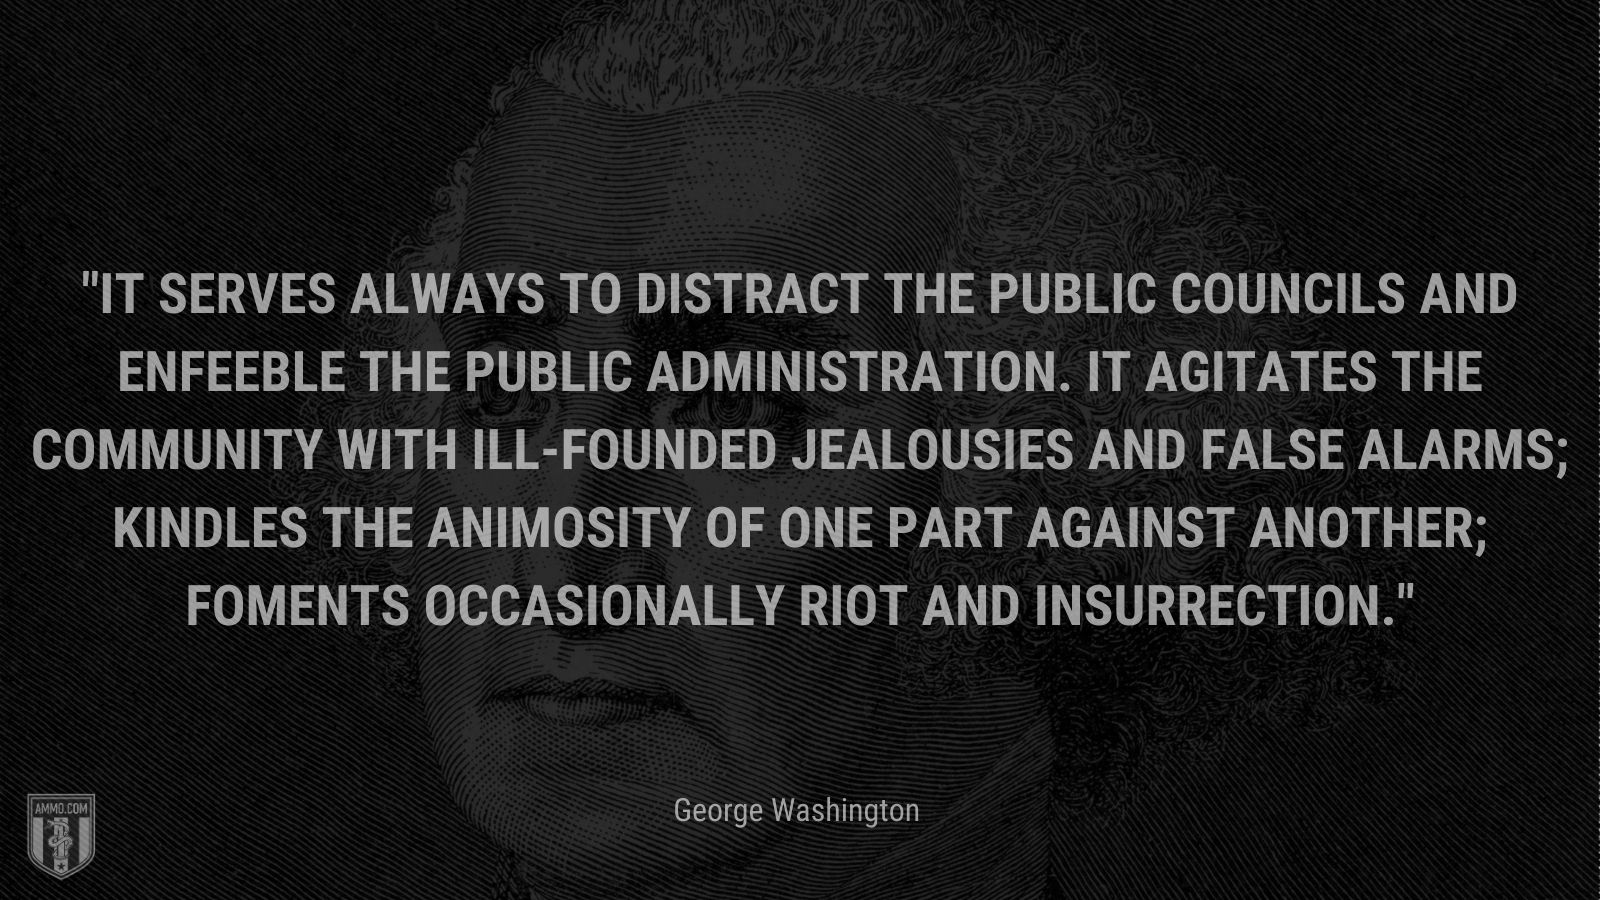 “ It serves always to distract the public councils and enfeeble the public administration. It agitates the community with ill-founded jealousies and false alarms; kindles the animosity of one part against another; foments occasionally riot and insurrection.” - George Washington